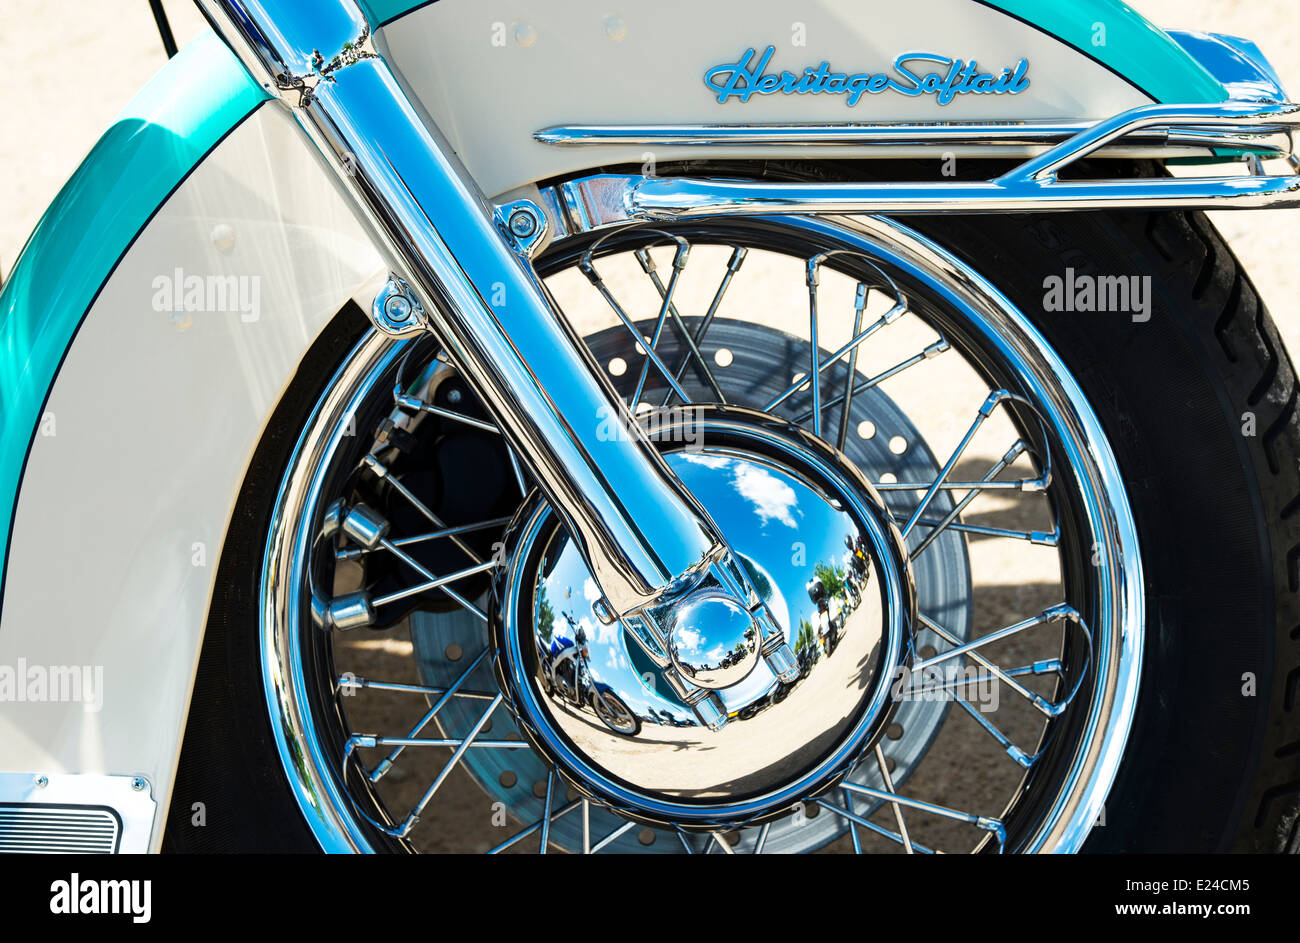 Harley Davidson heritage softail motorcycle, wheel abstract, at a bike show in England Stock Photo